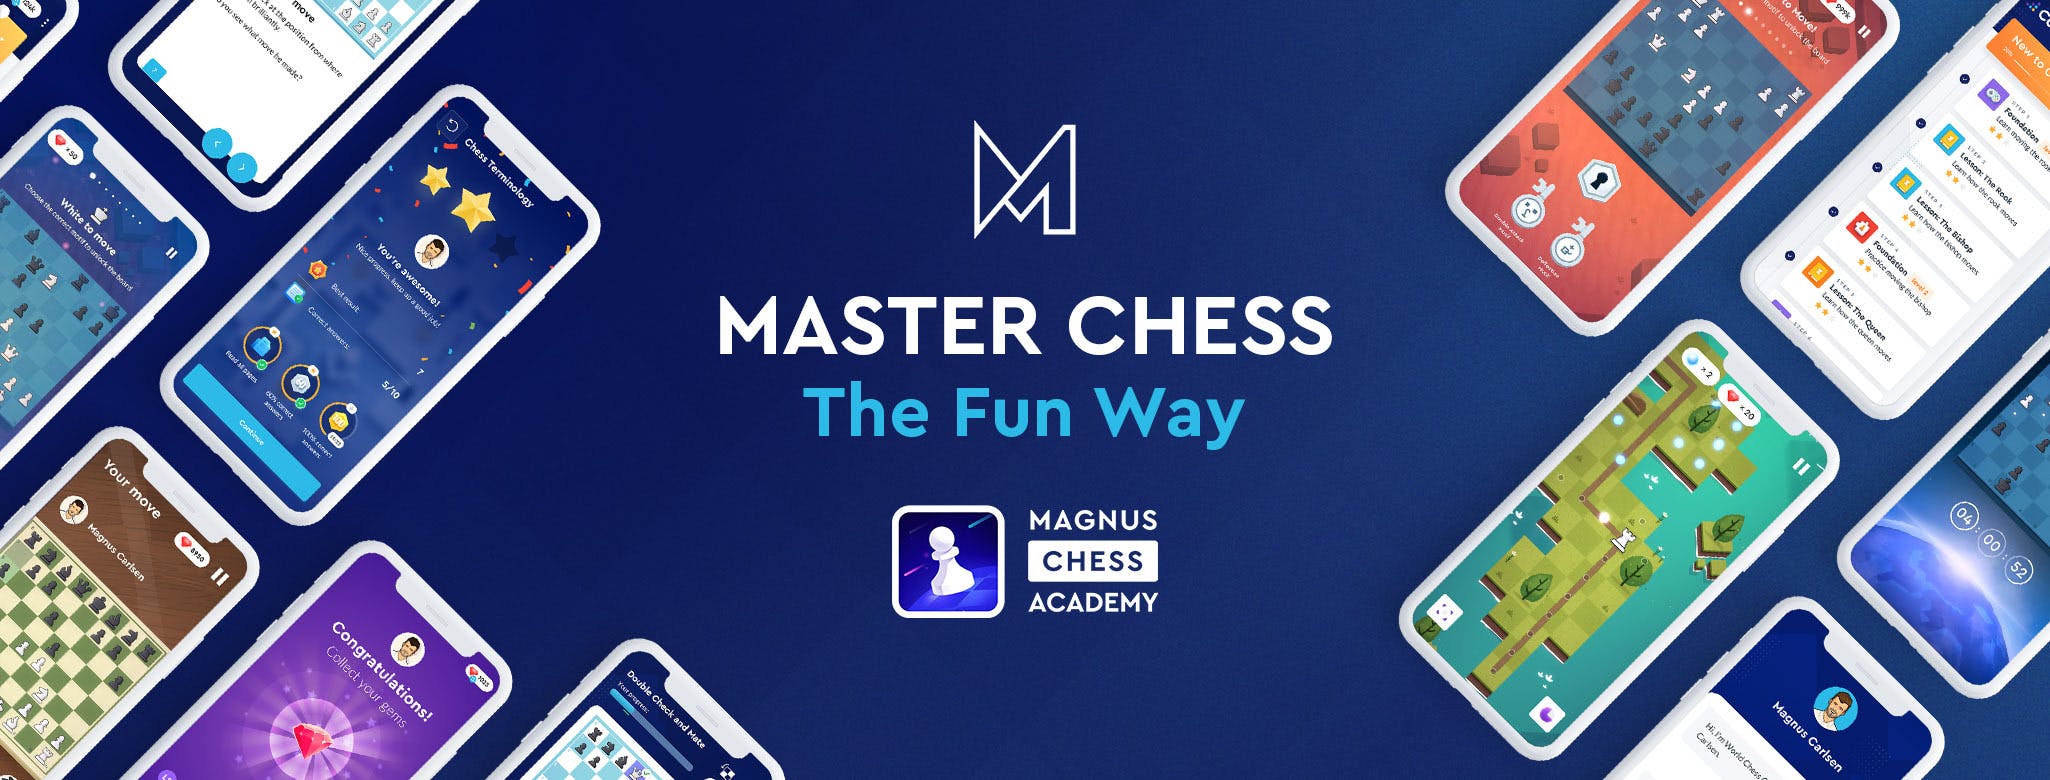 Meet Our Staff - Magnus Chess Academy (Silver Knights)